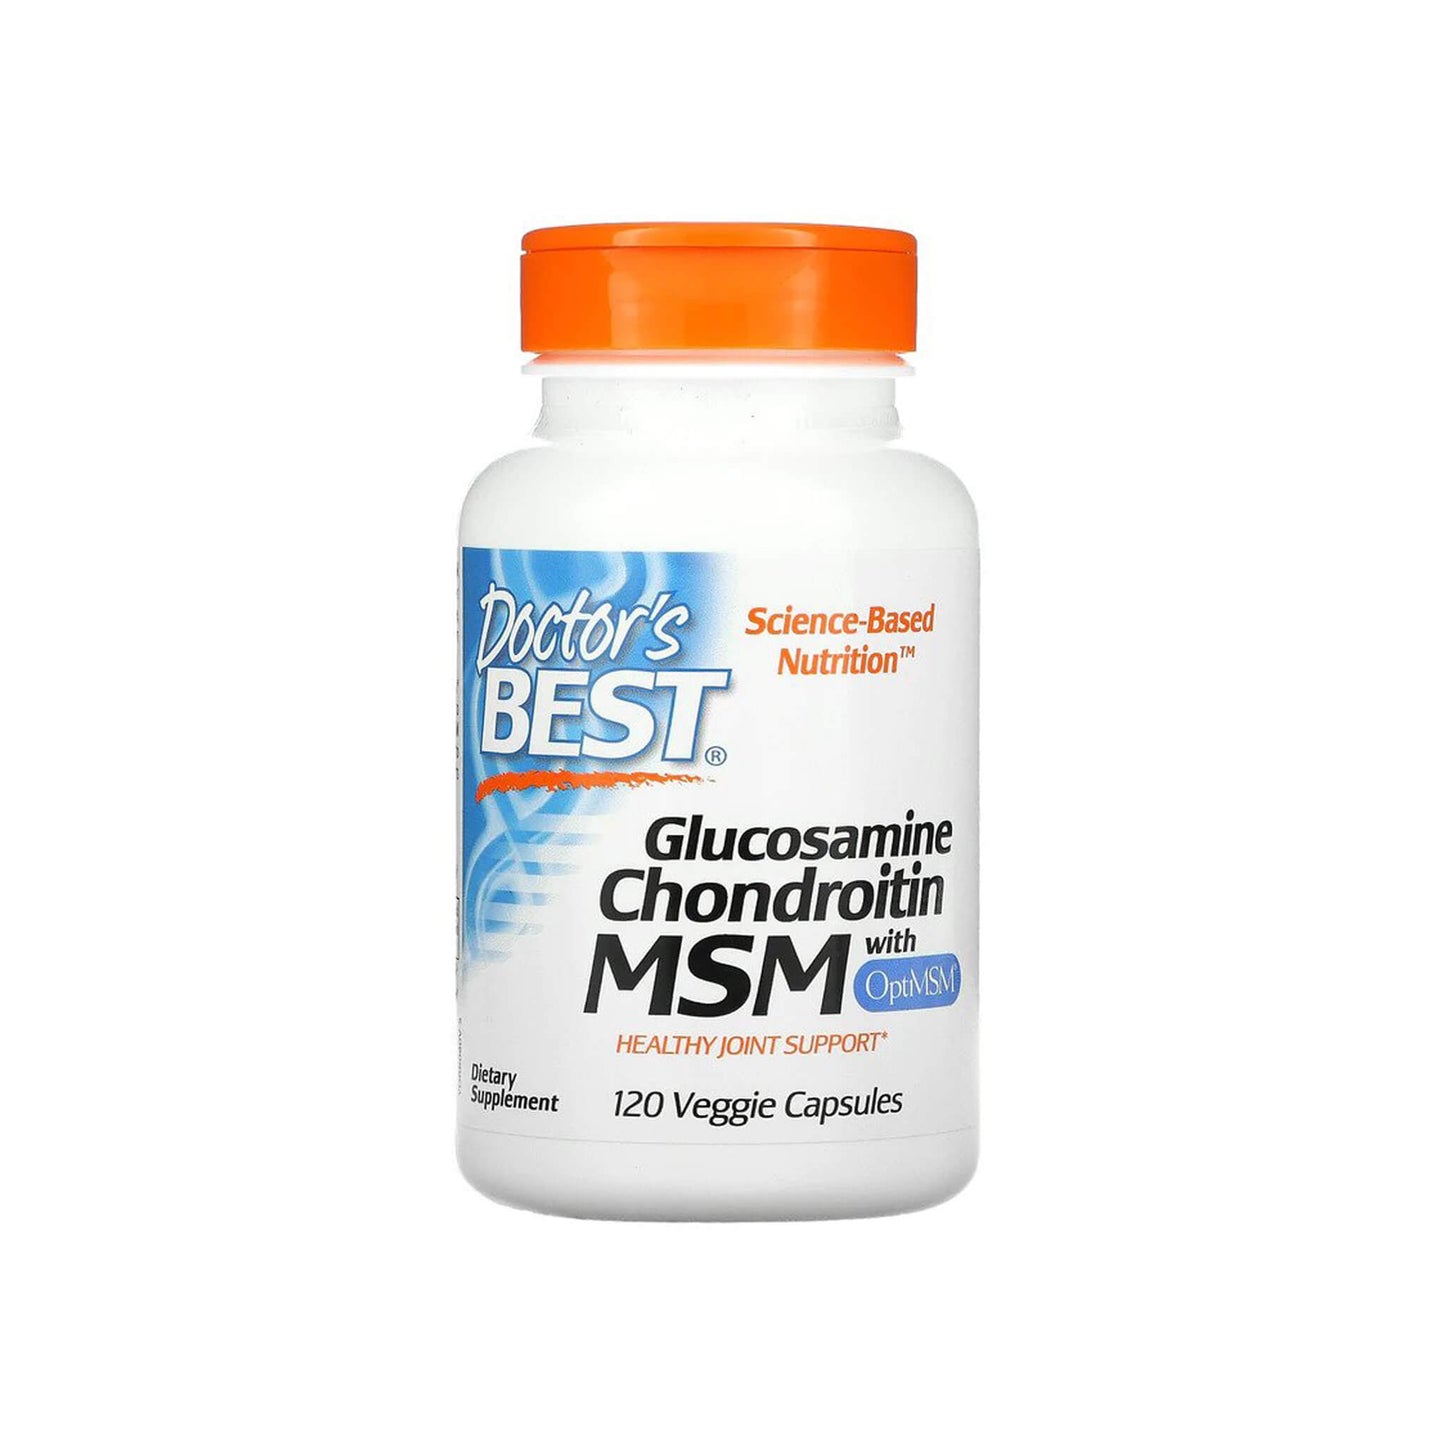 Doctor's Best Glucosamine Chondroitin MSM with OptiMSM, 120 Capsules